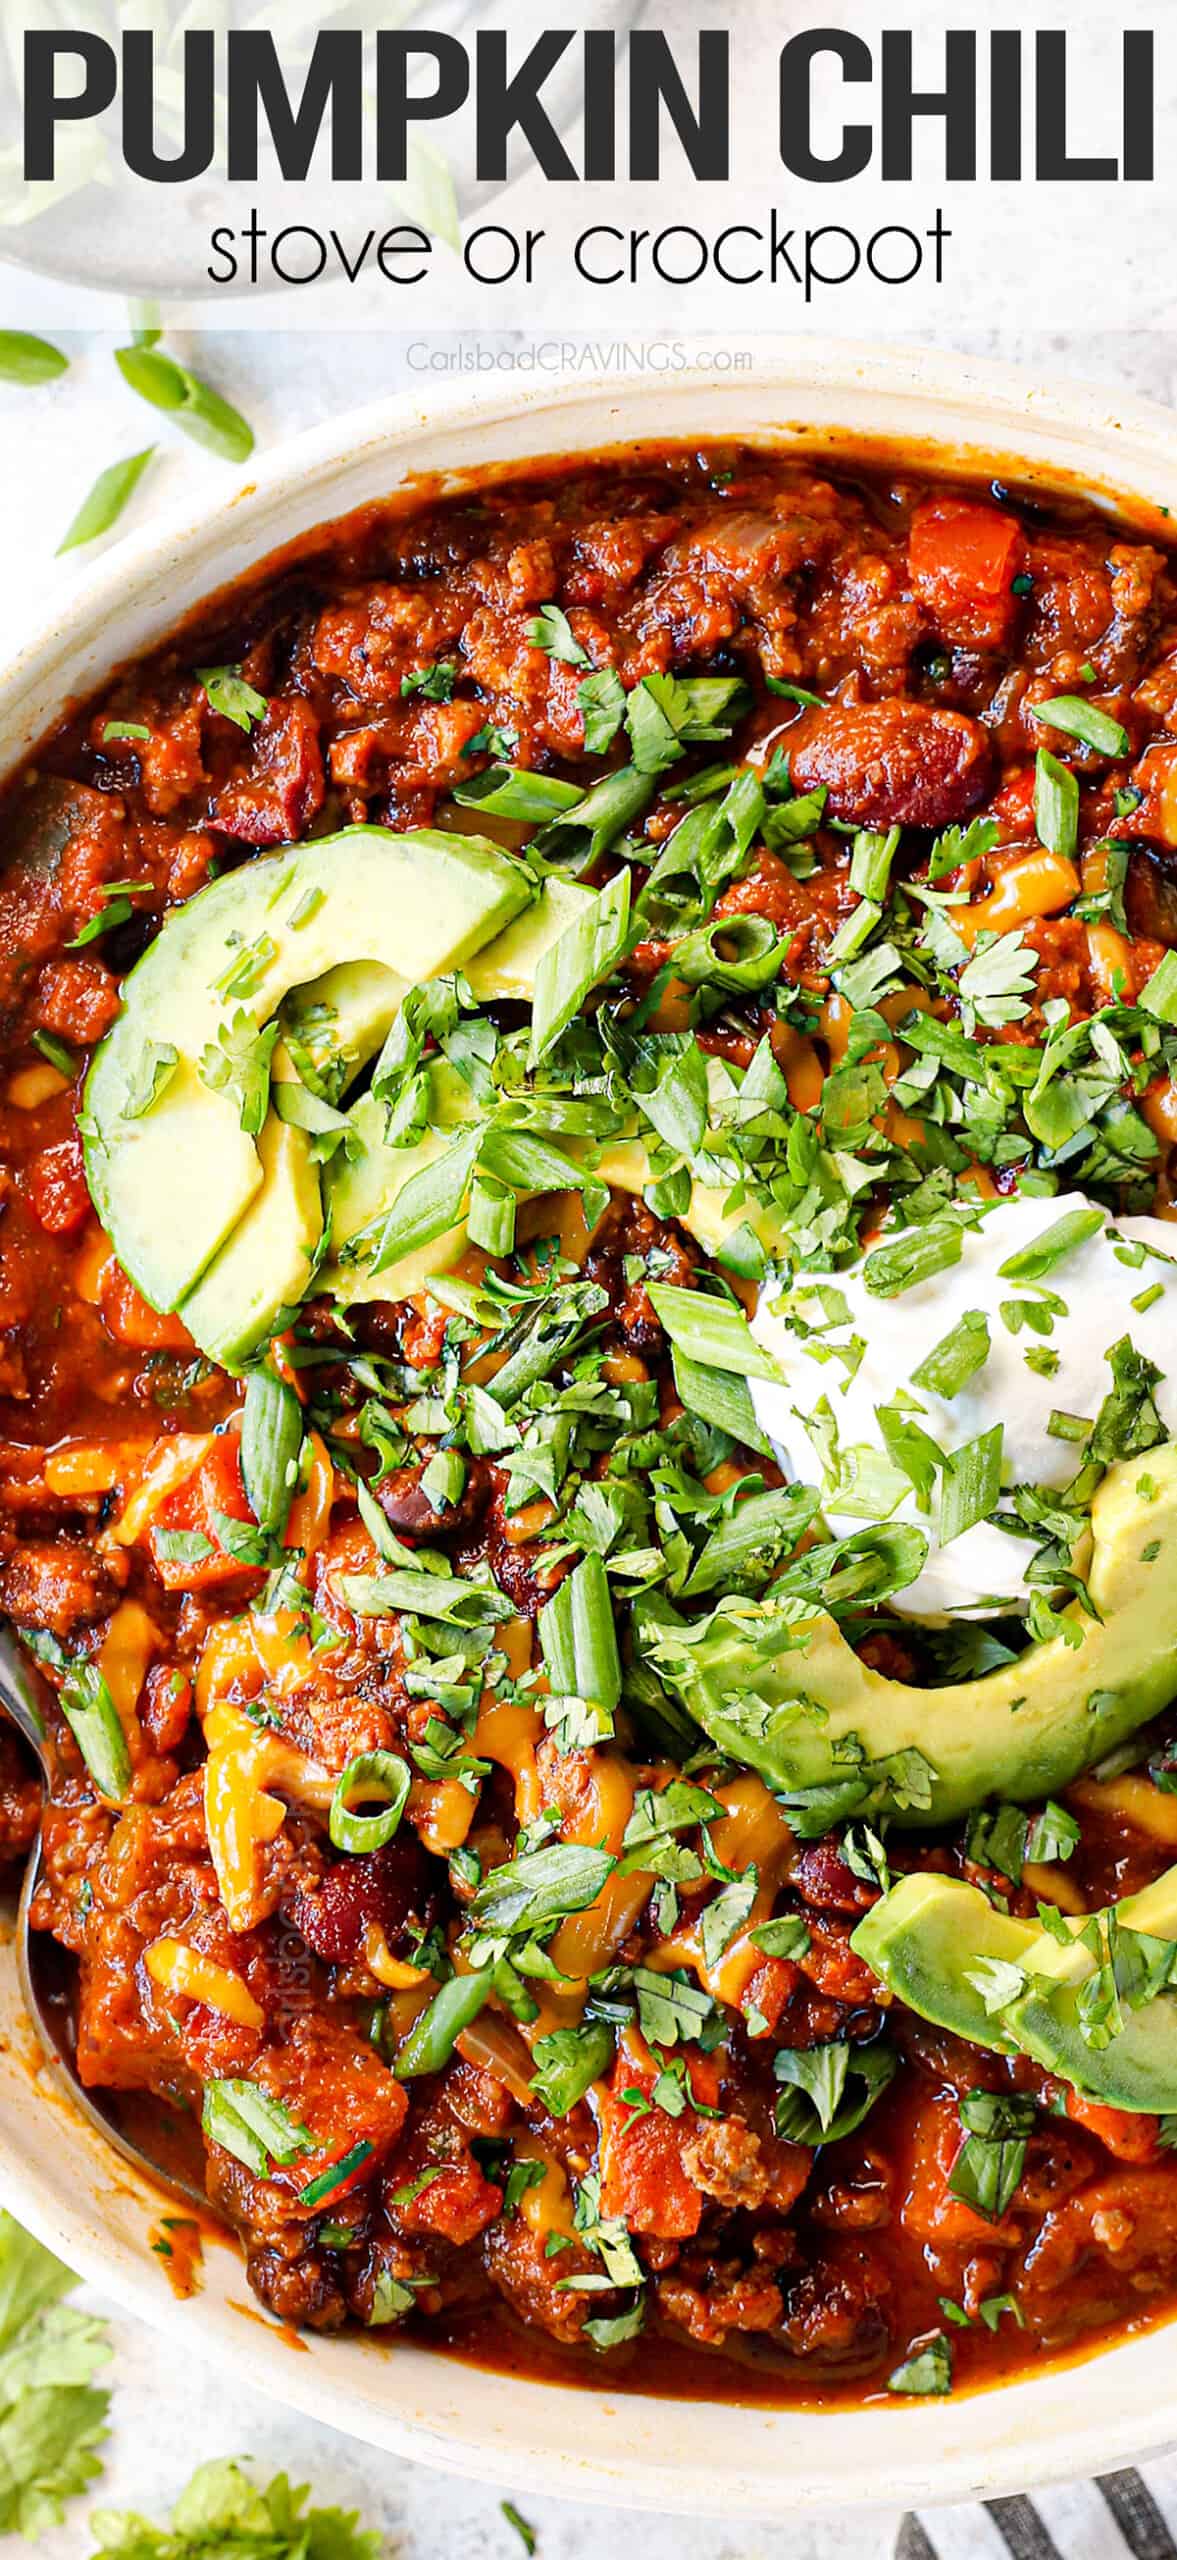 up close showing how to serve pumpkin chili by topping with cilantro, sour cream, avocados and cilantro